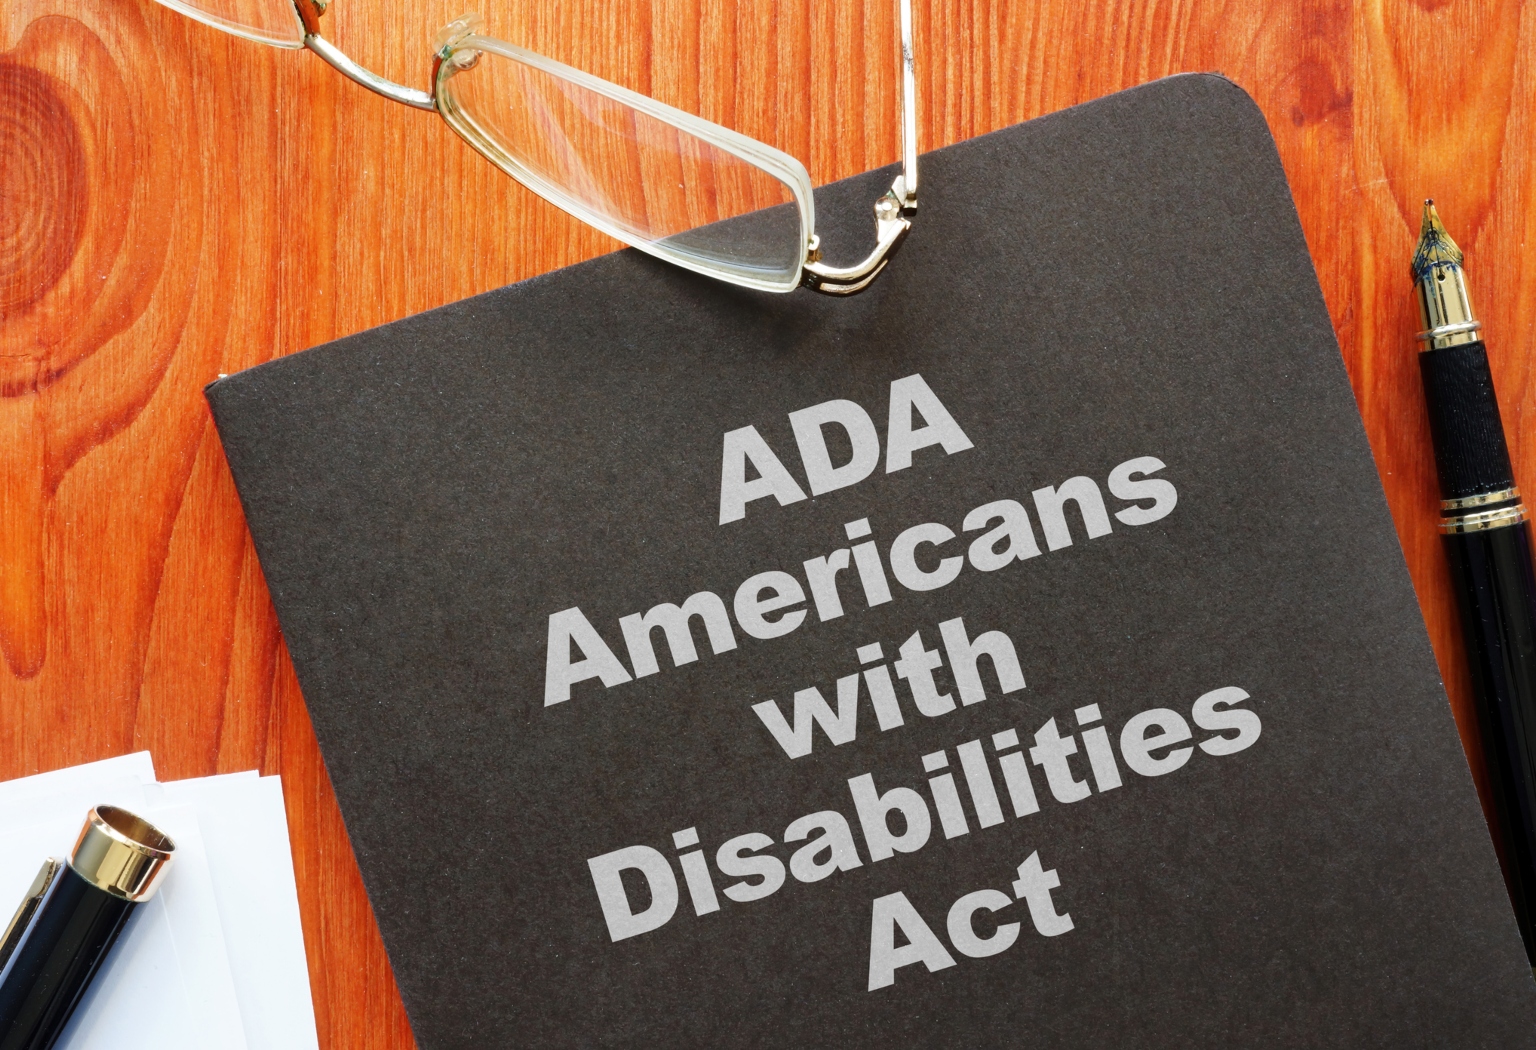 The Americans with Disabilities Act (ADA) — What You Need to Know